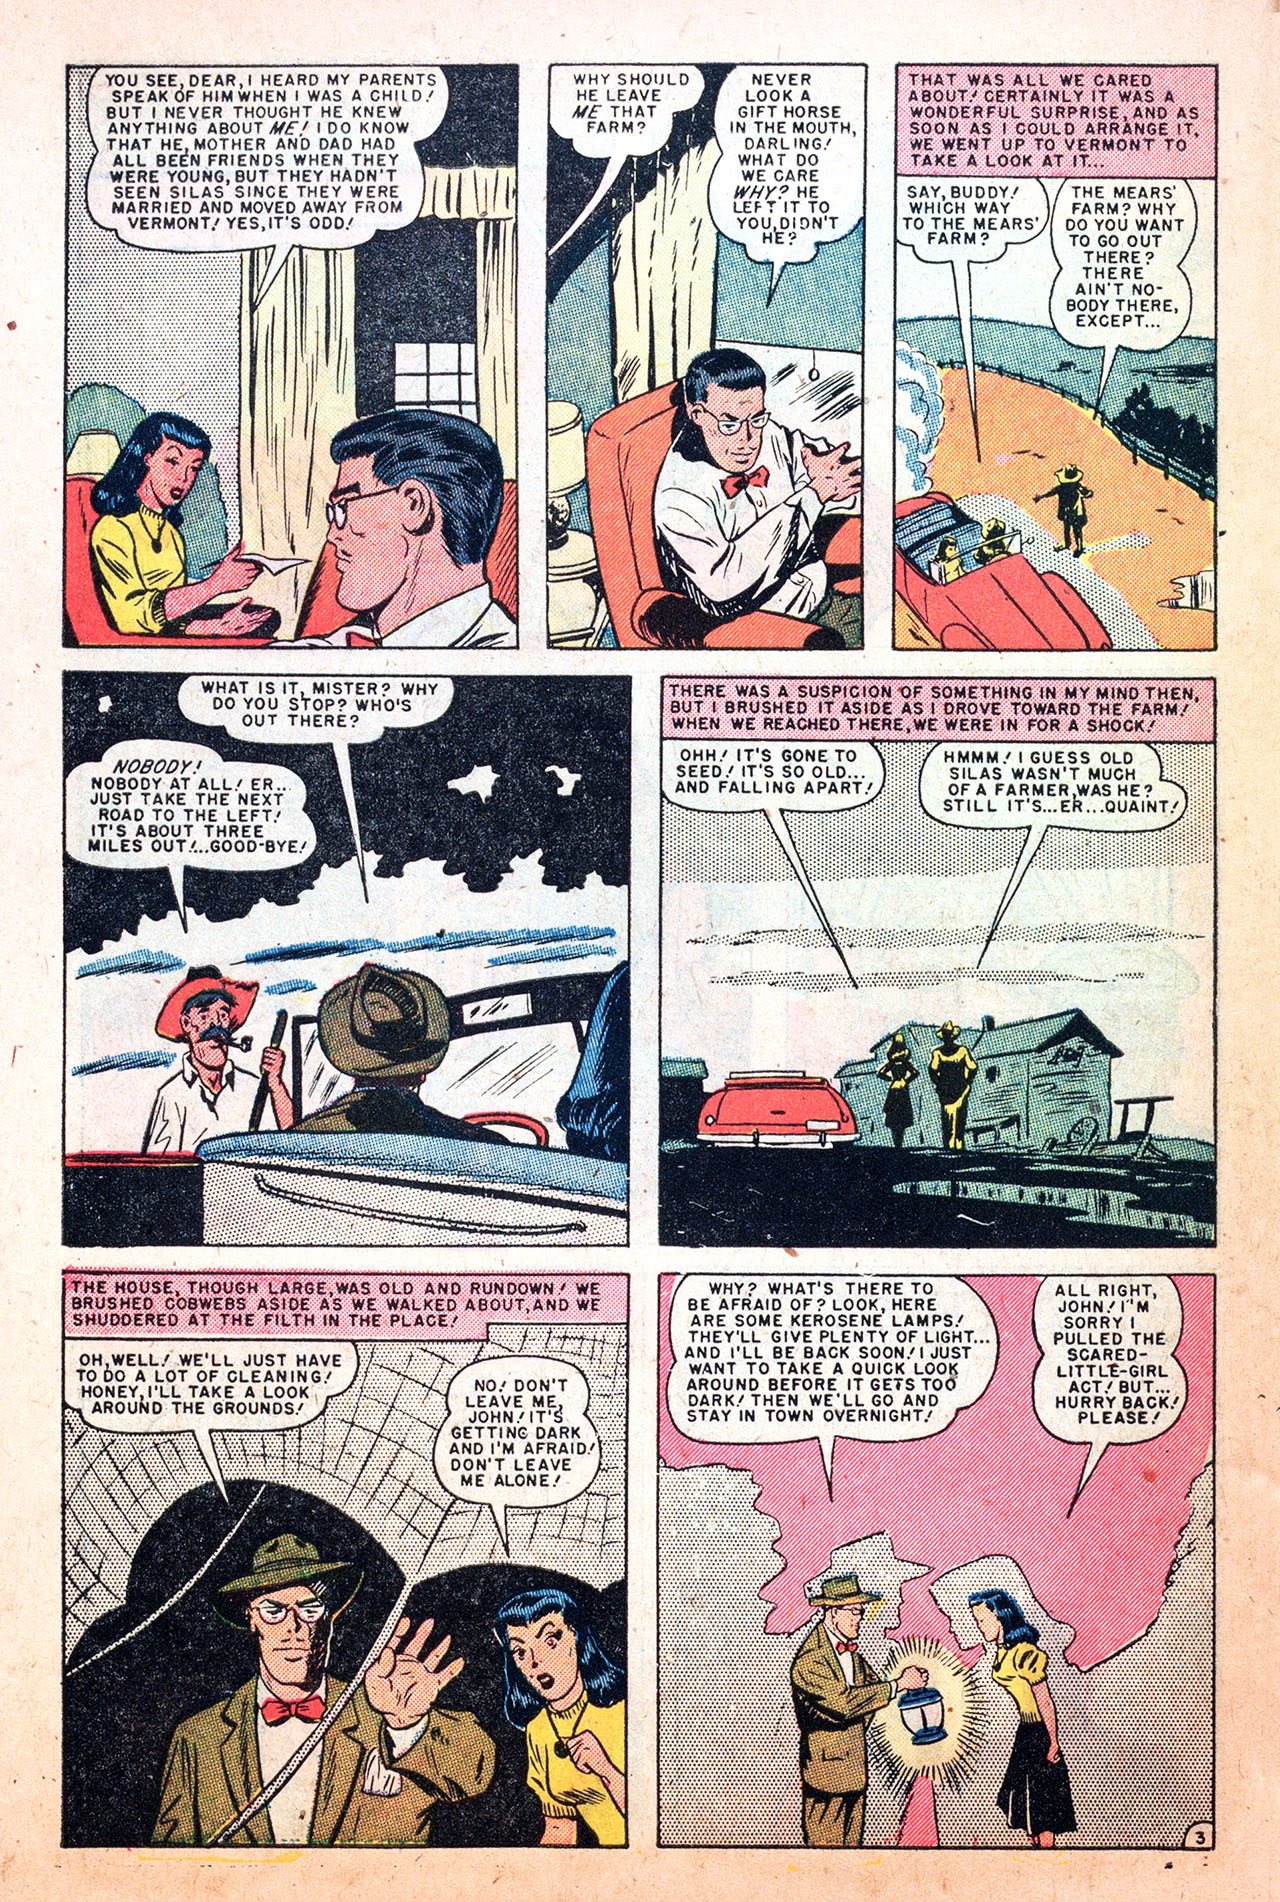 Marvel Tales (1949) 94 Page 27